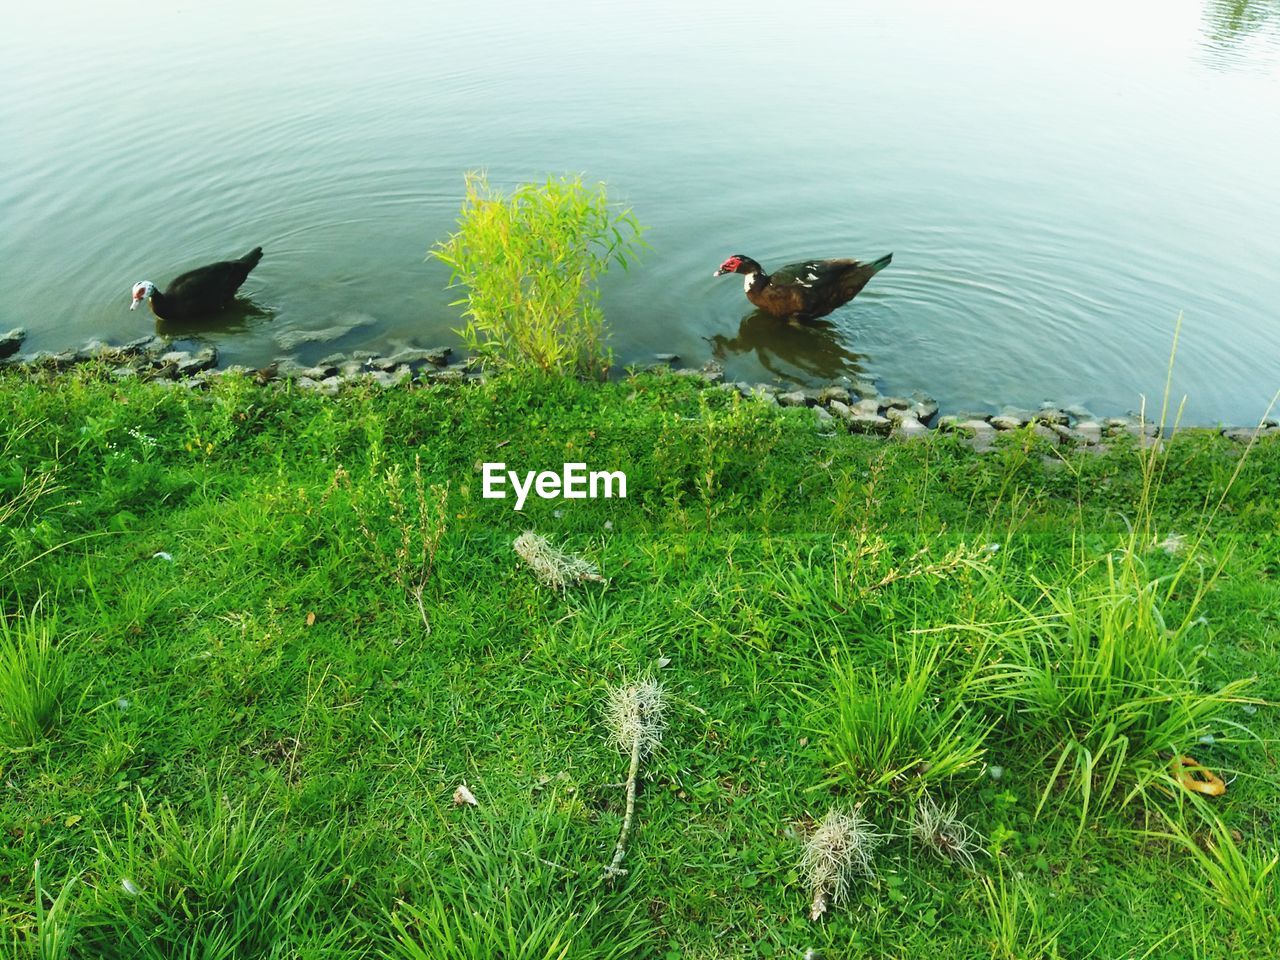 HIGH ANGLE VIEW OF BIRDS PERCHING ON GRASS